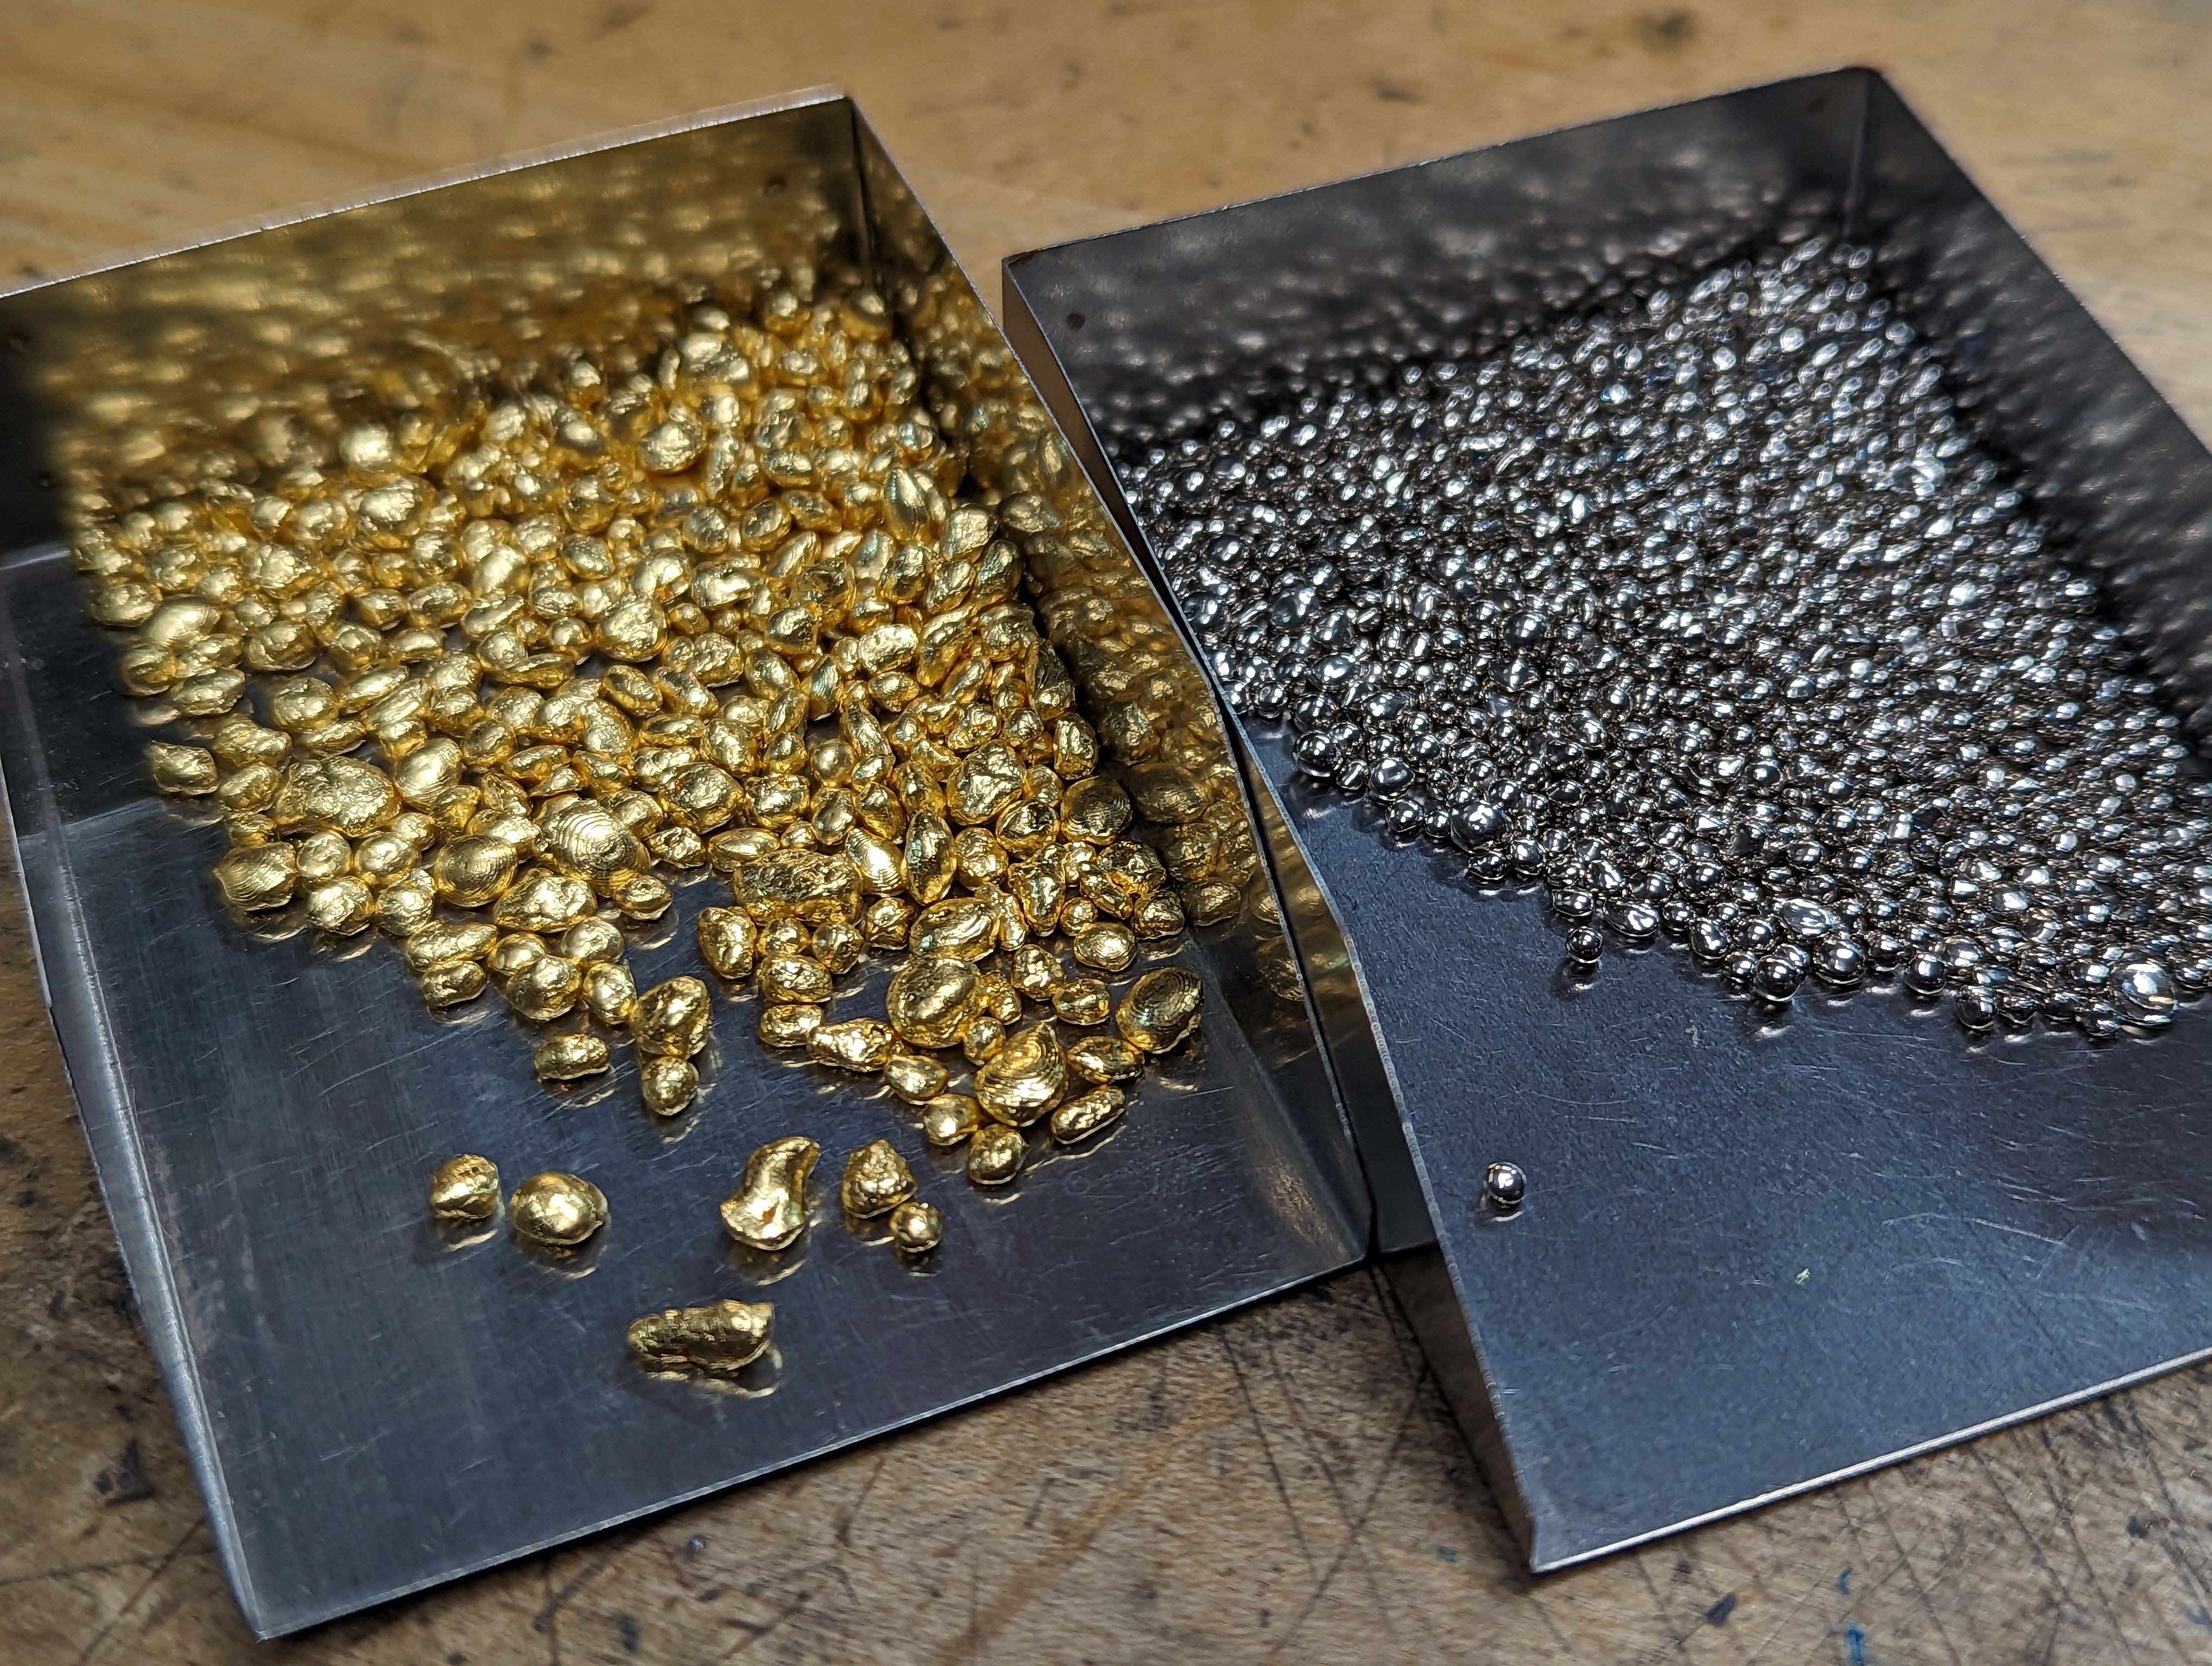 24K gold from recycled old jewelry and alloy to make new karat gold